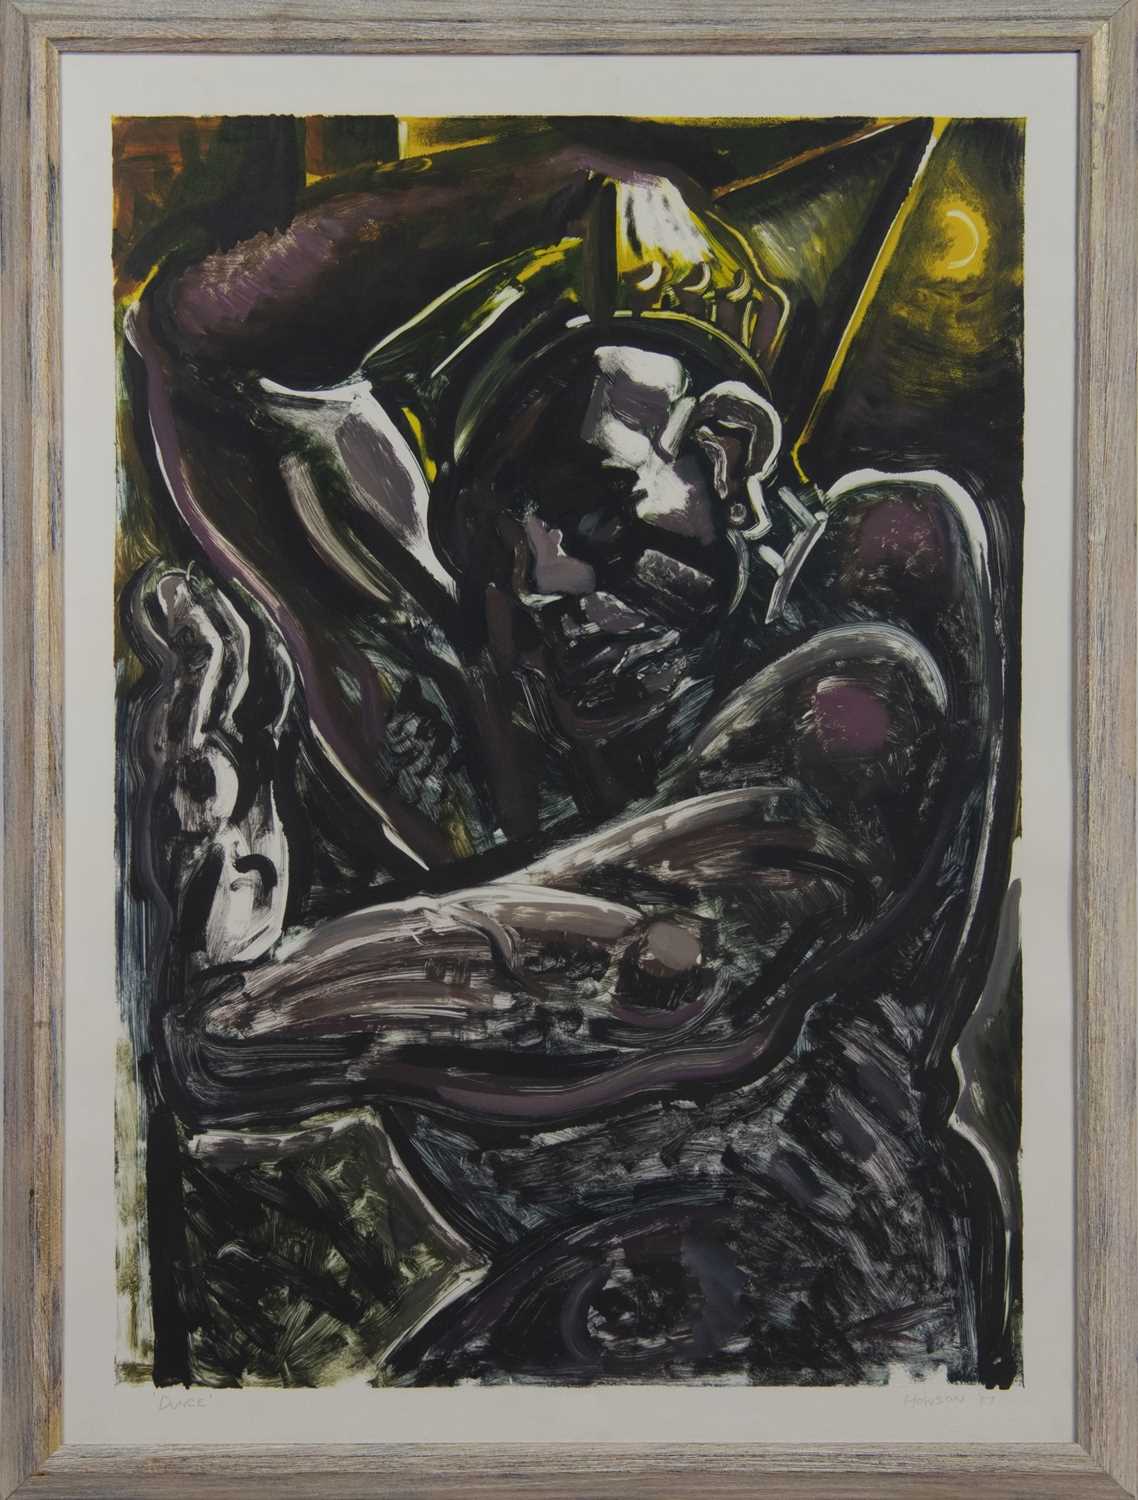 DUNCE, A MONOPRINT BY PETER HOWSON